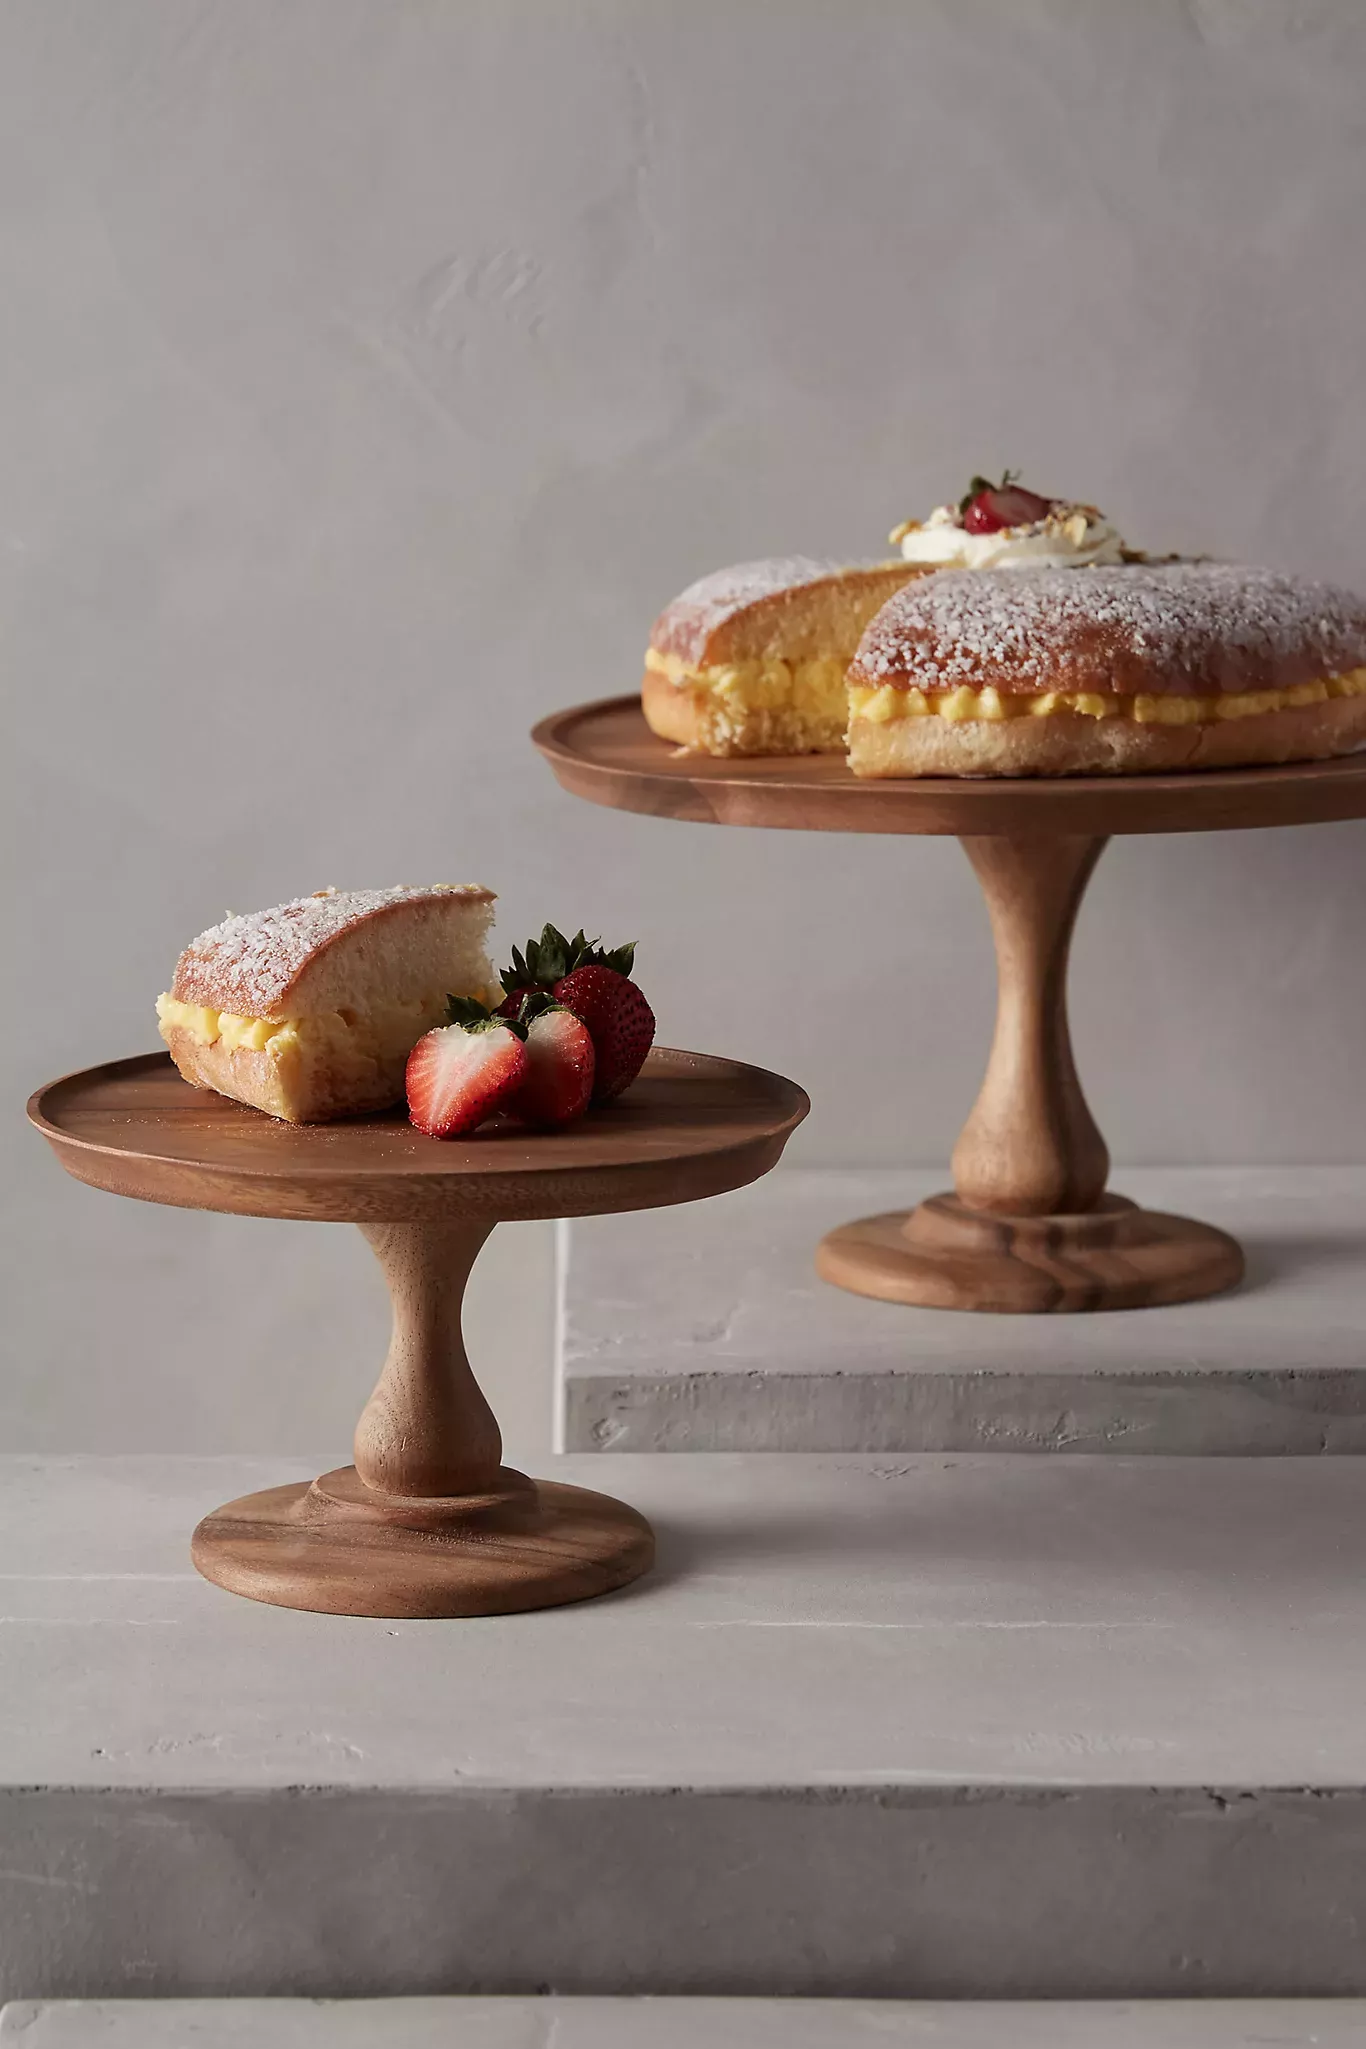 Choosing Between a Cake or Tiered Stand
for Your Dessert Display